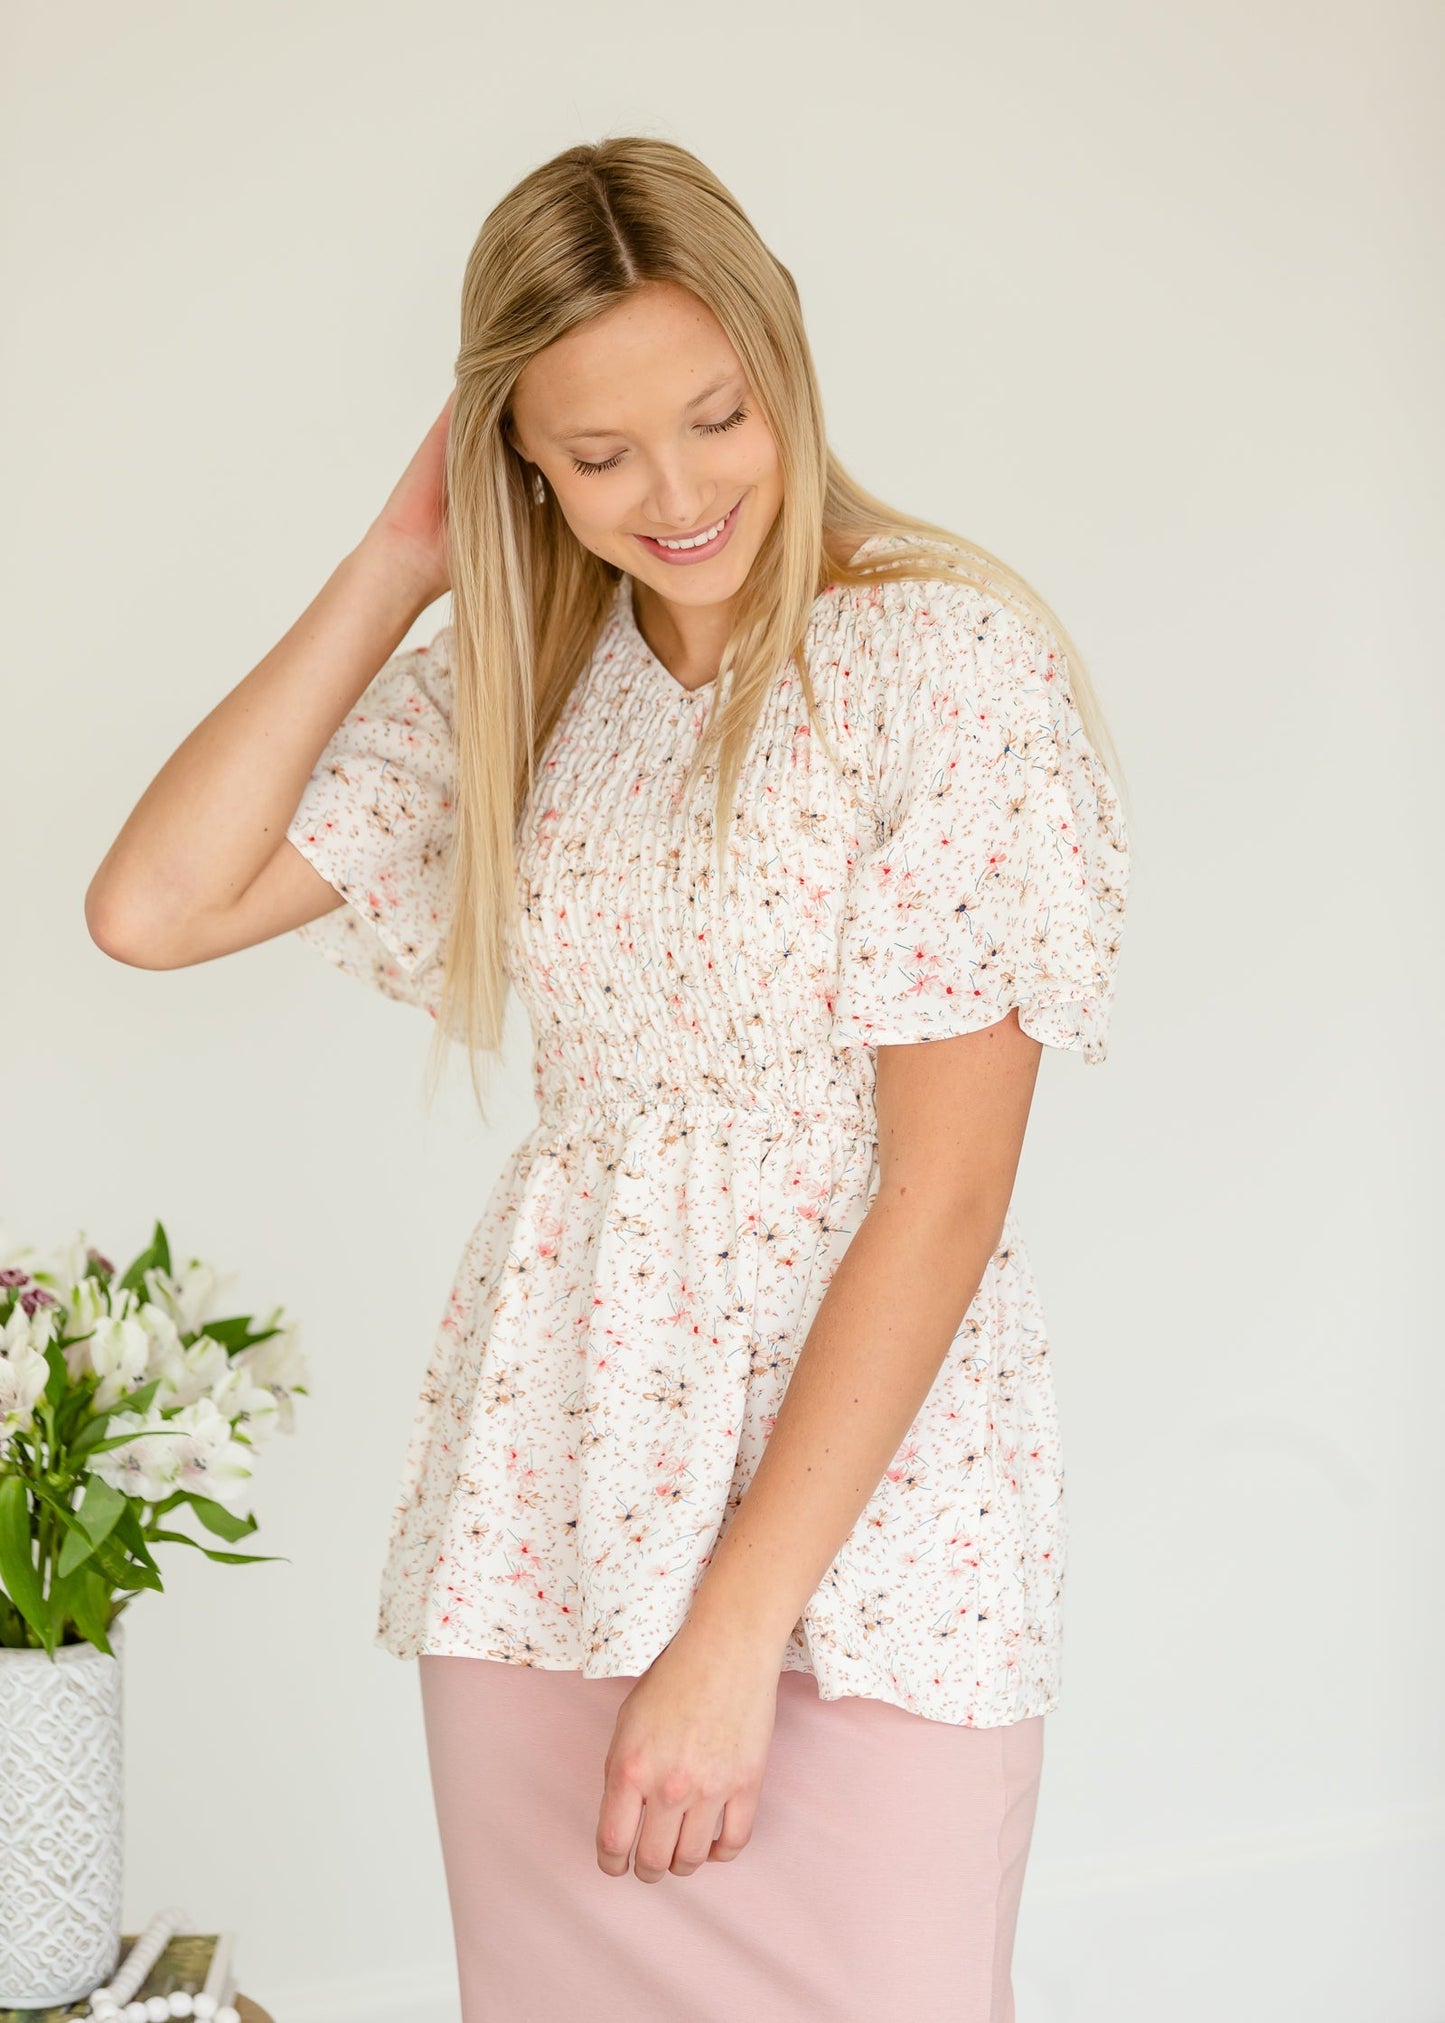 Cream Floral Smocked Top - FINAL SALE Tops